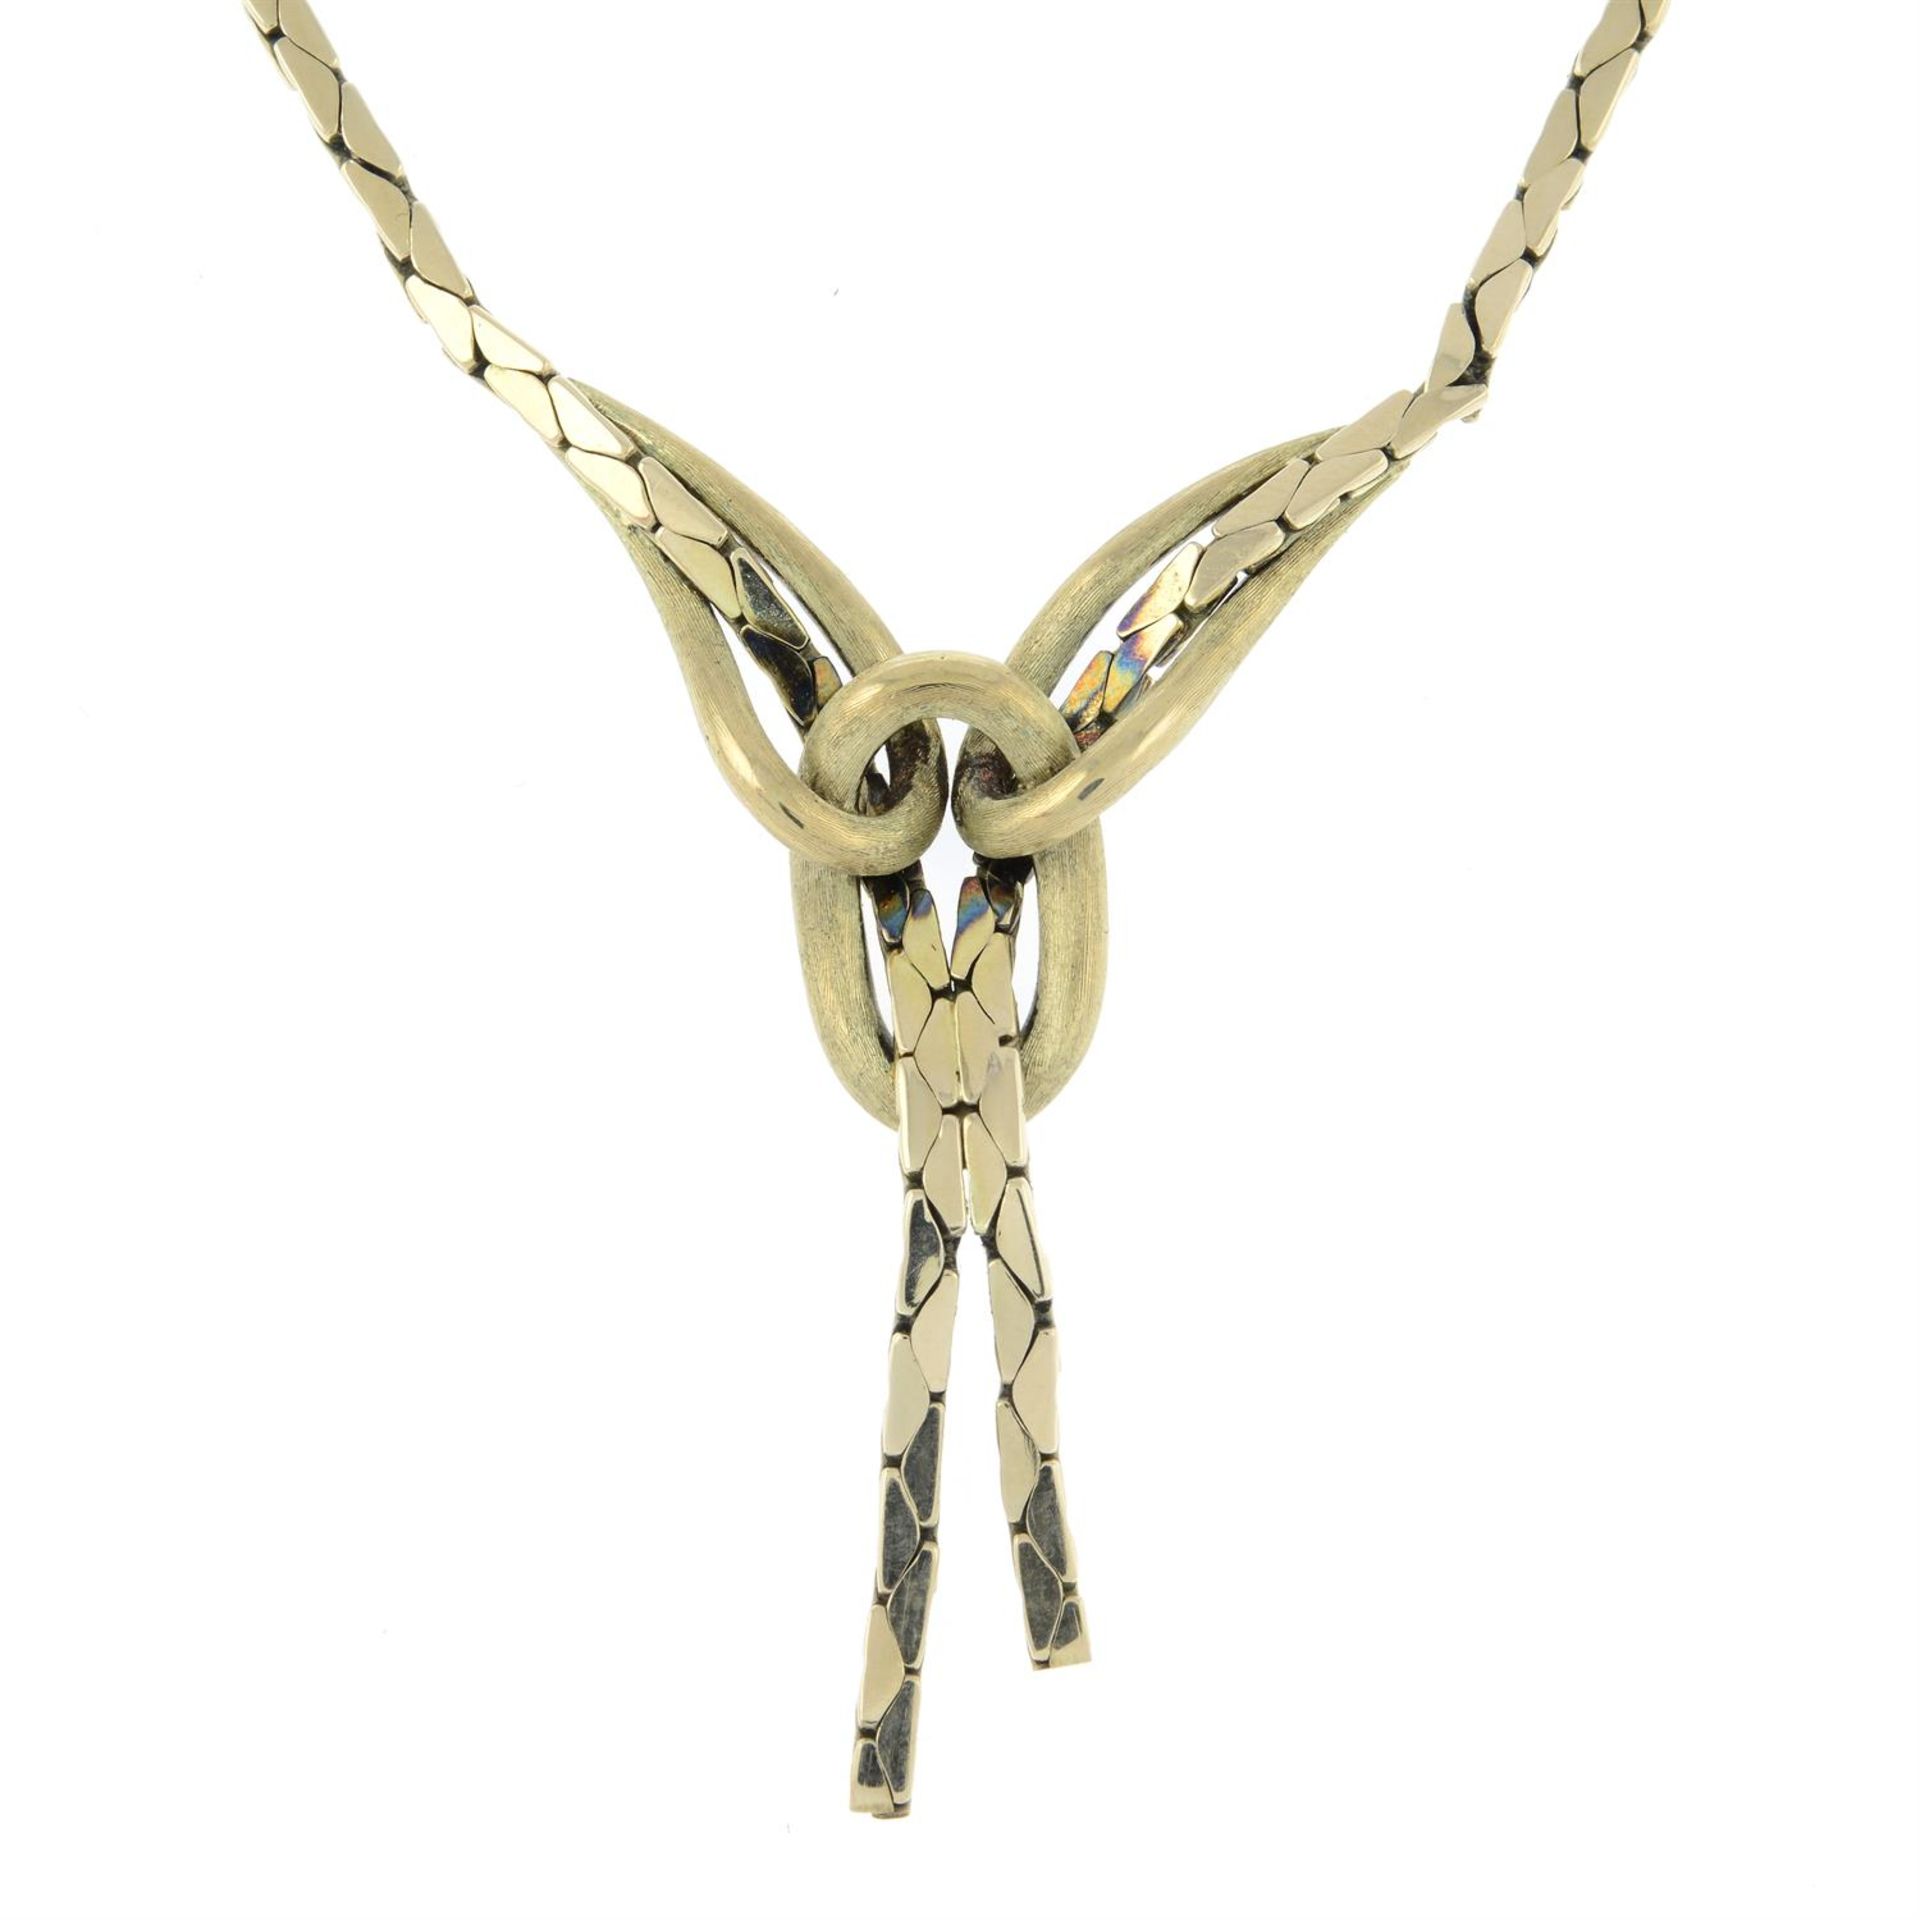 A 9ct gold abstract knot necklace.